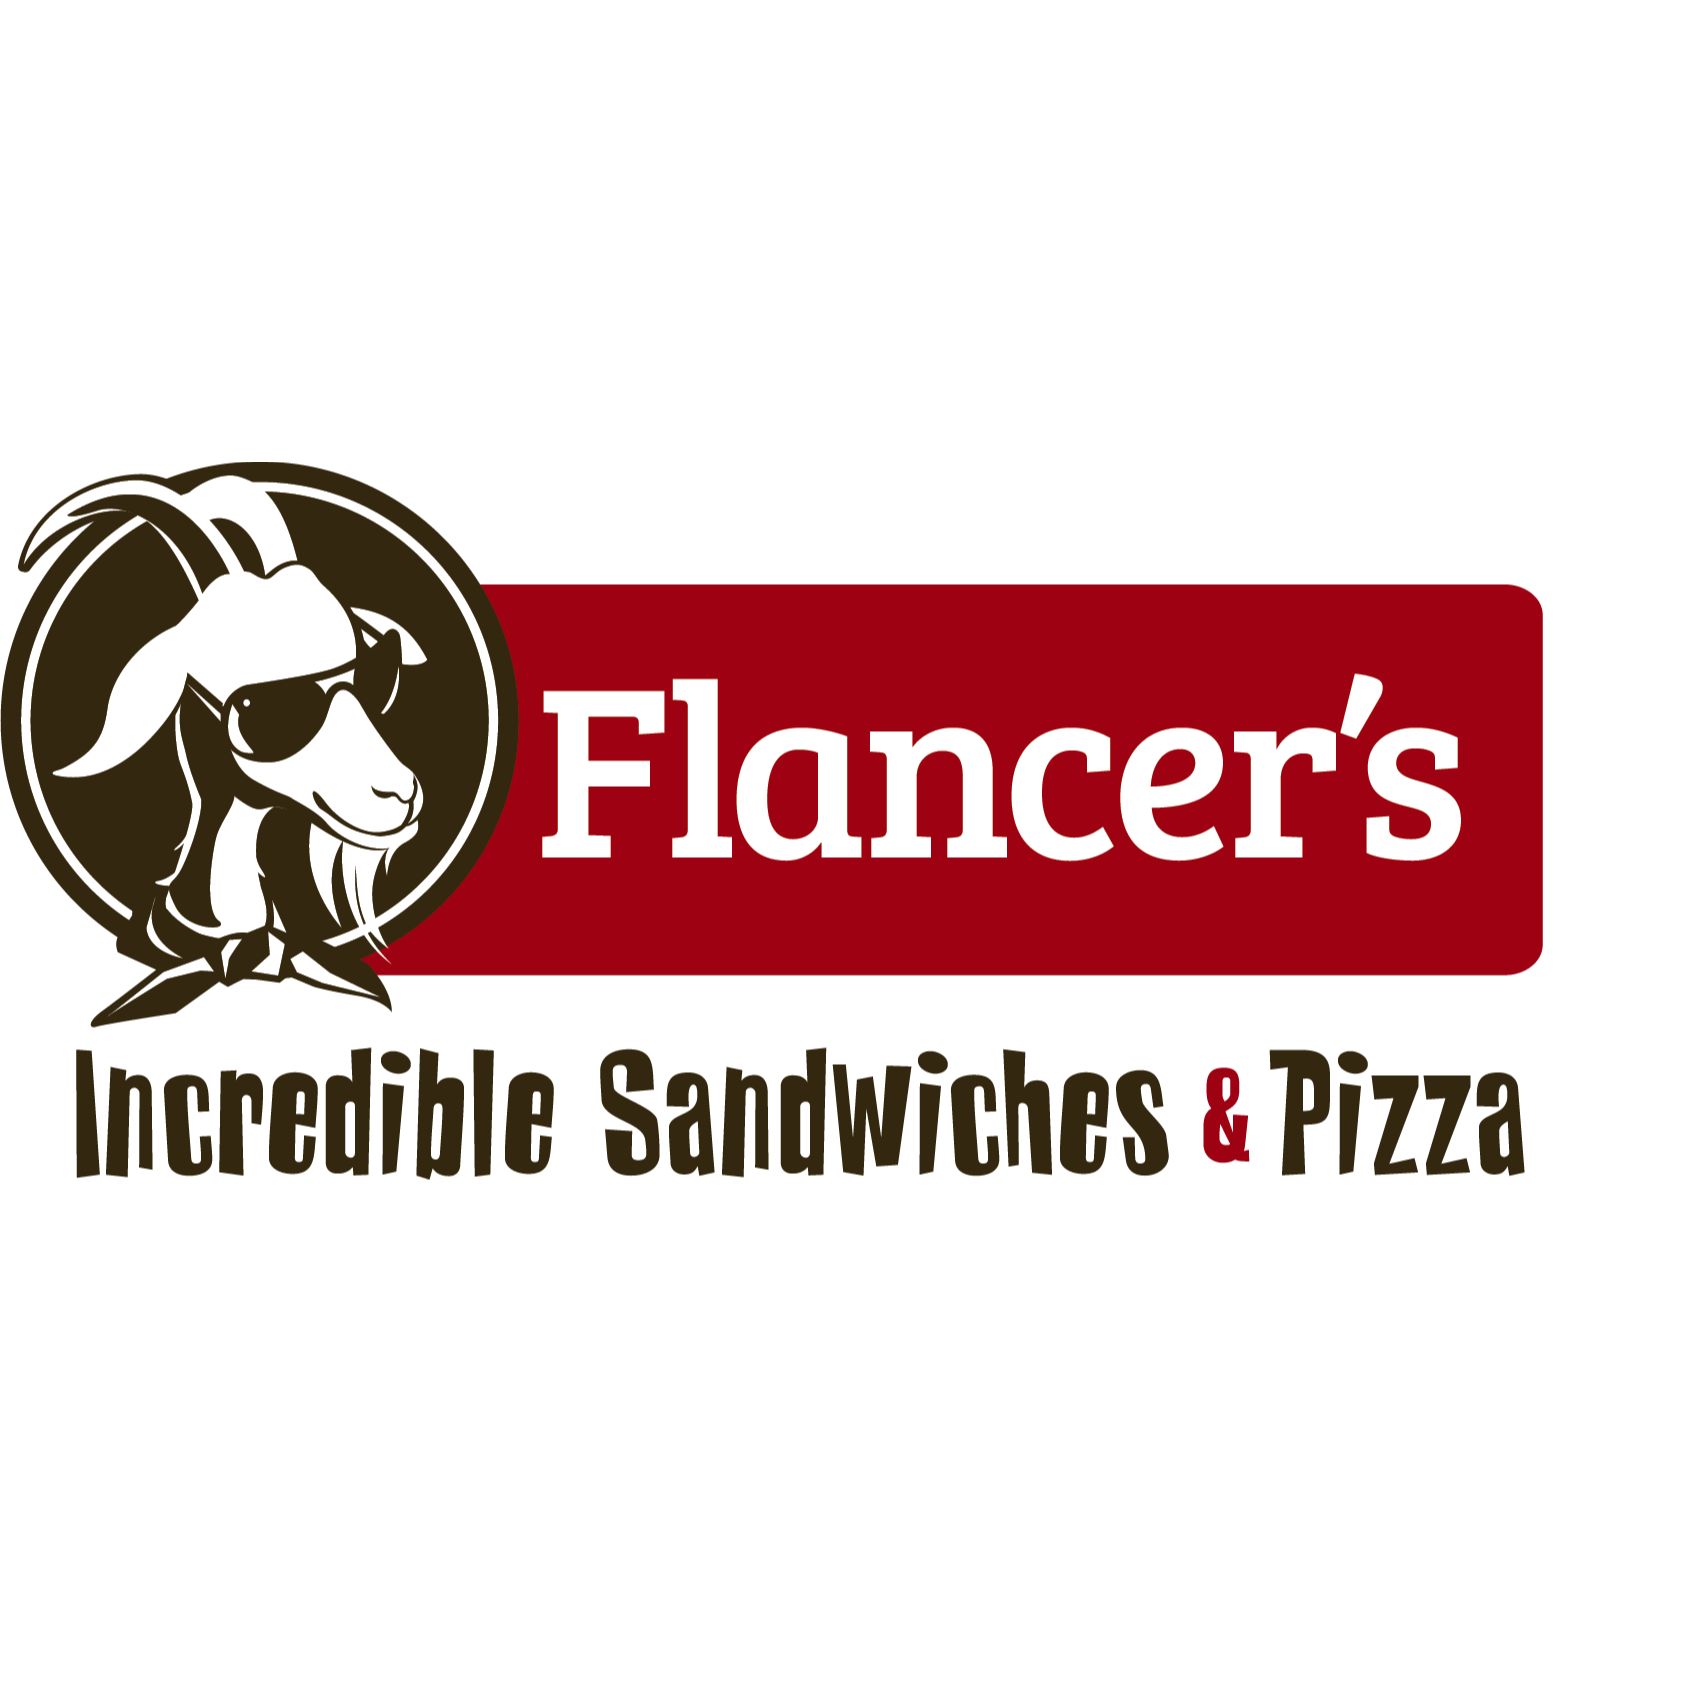 Flancer's Incredible Sandwiches & Pizza